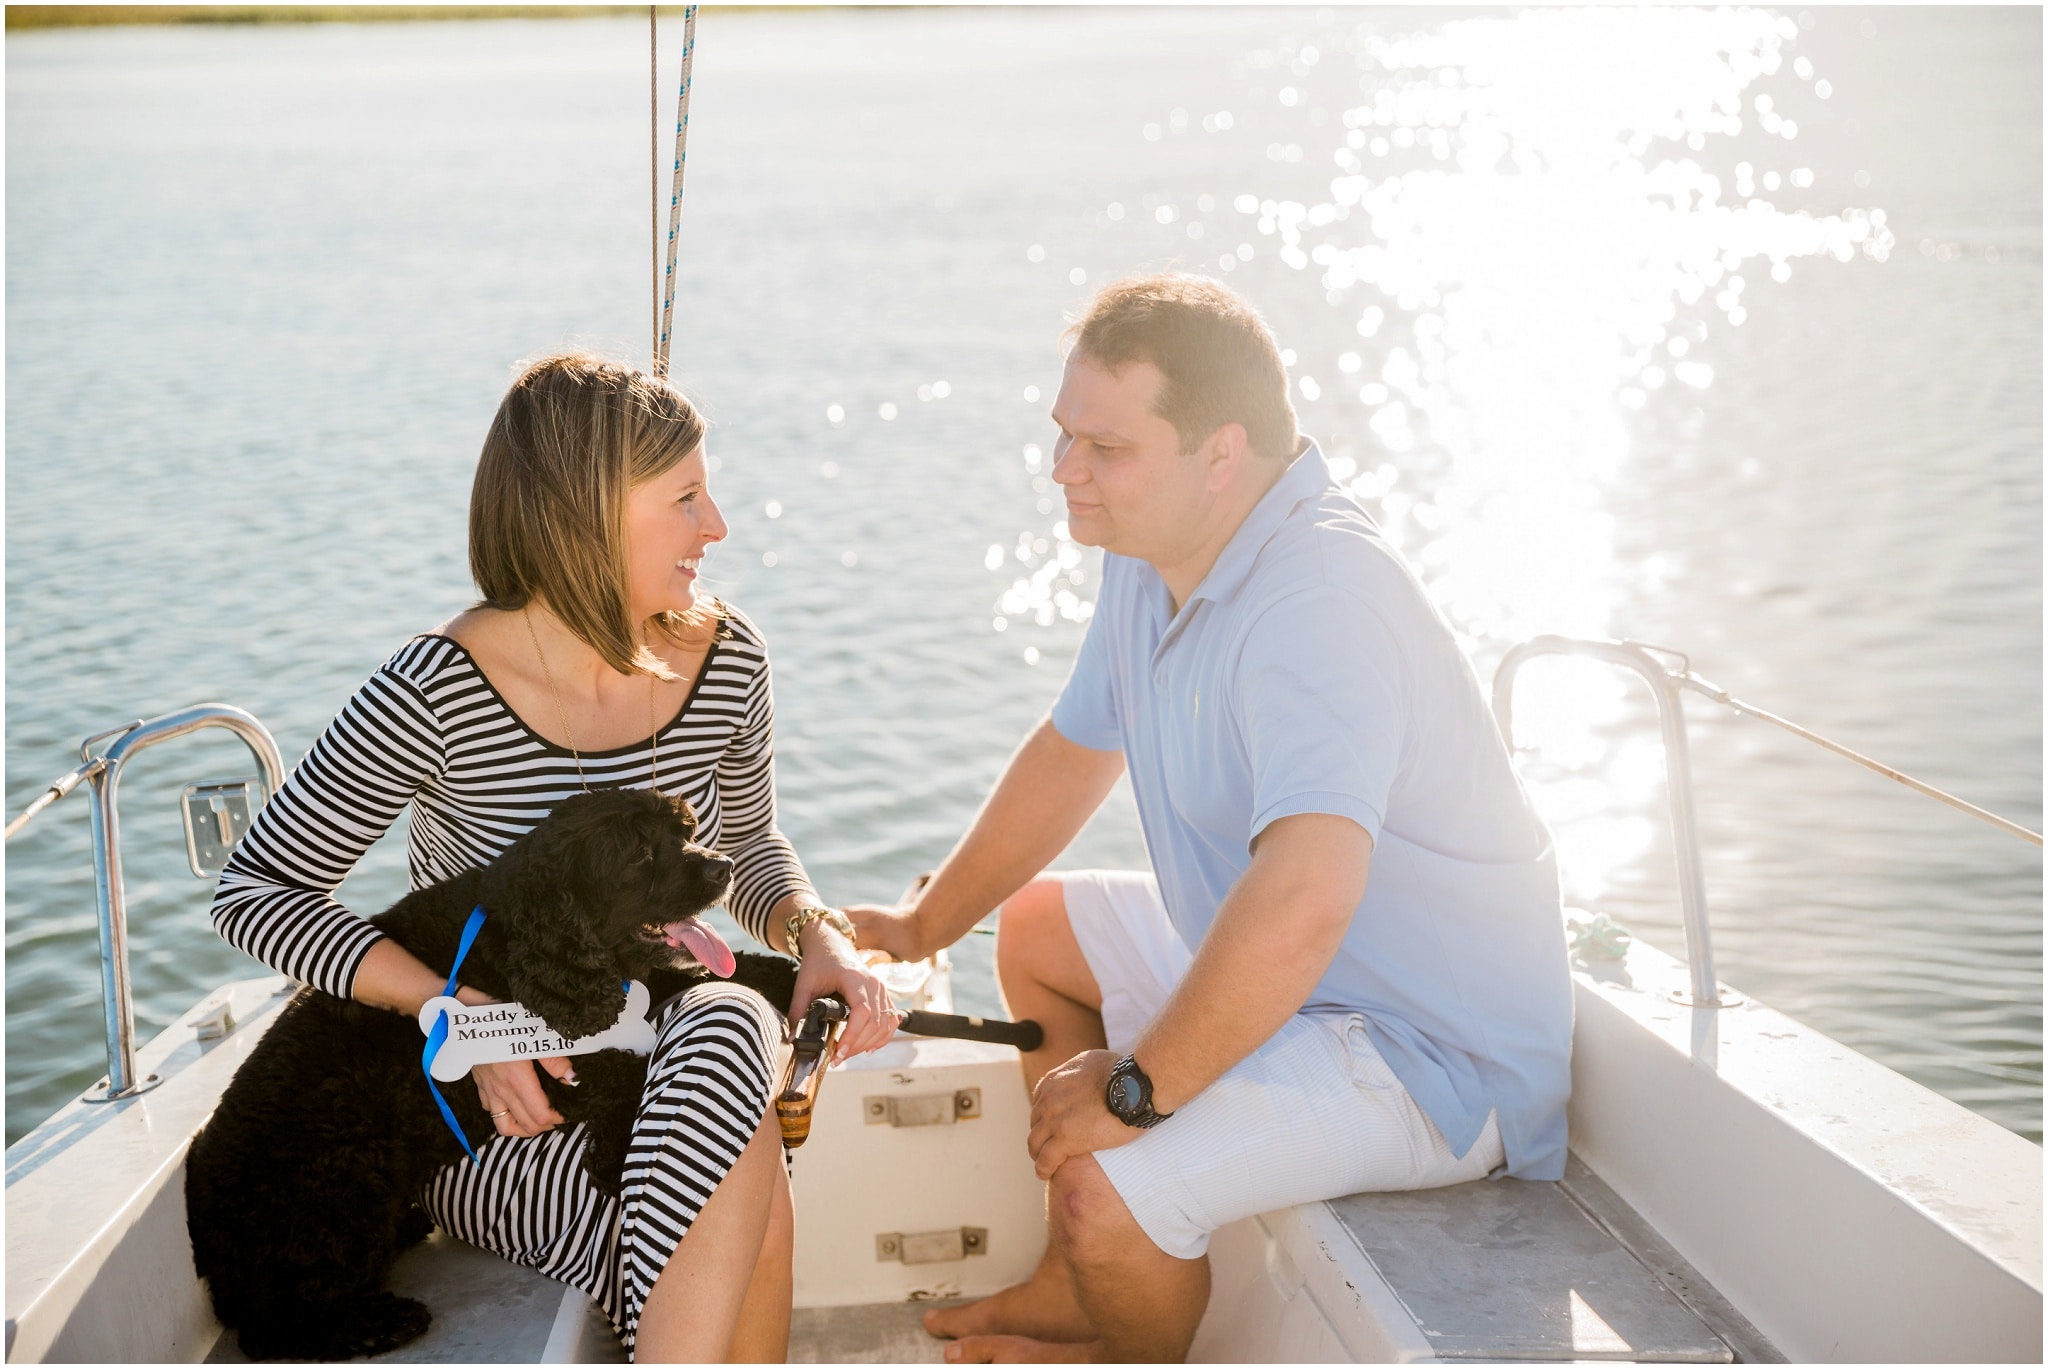 Cruising on a boat in the creek with the dog, Dana and Bradley, Sailing, Myrtle Beach Engagement Photography Session, Murrells Inlet, South Carolina, www.onelifephoto.net Photography